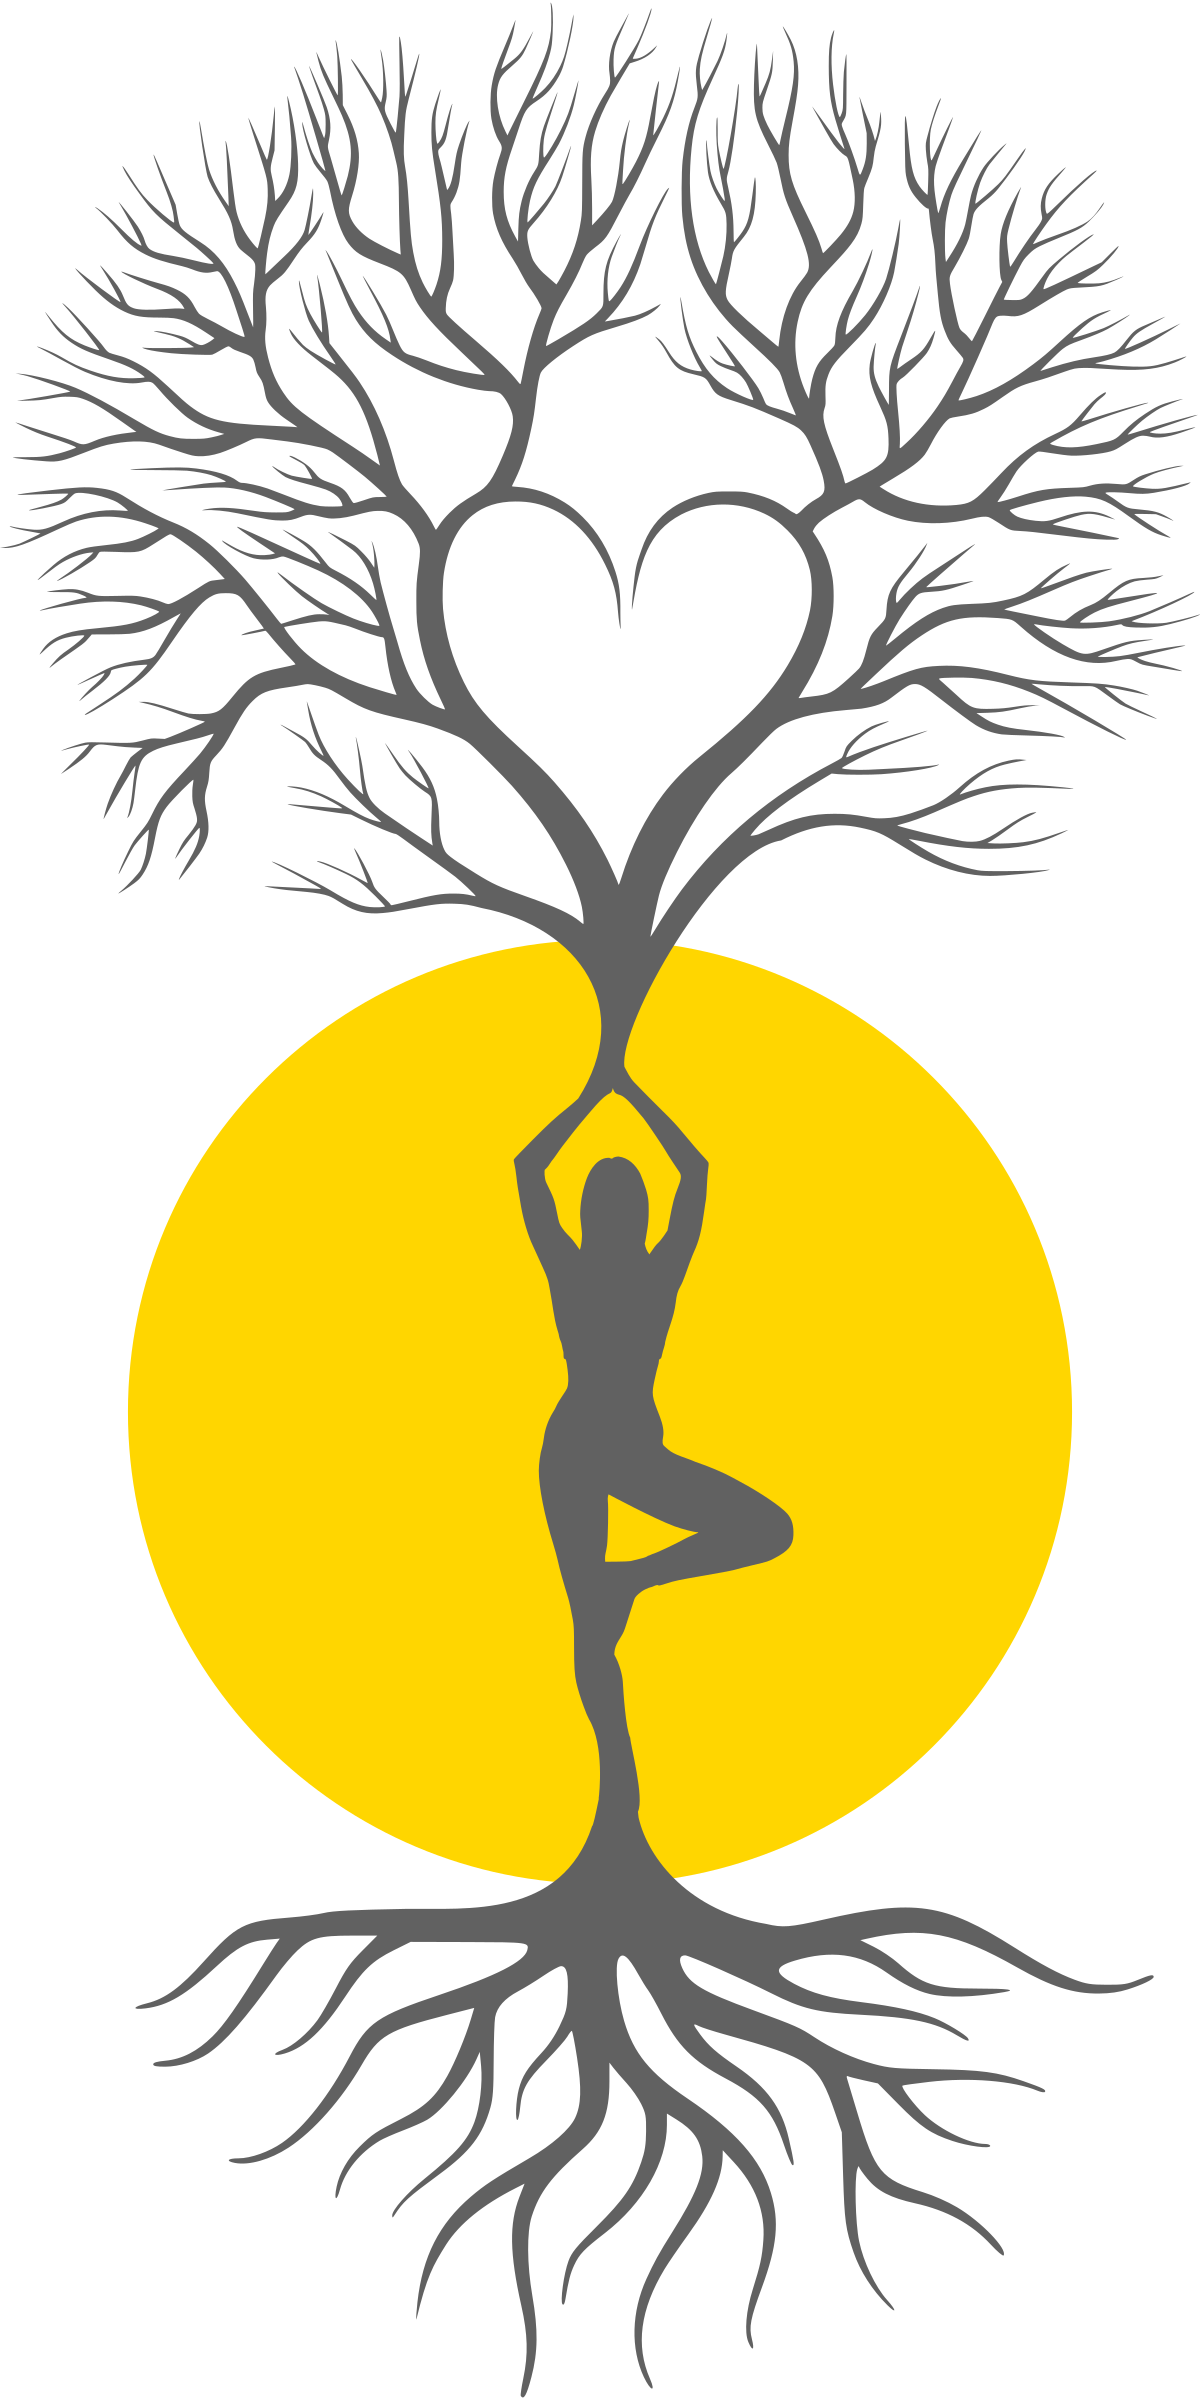 Yoga Tree Silhouette Vector Clipart image - Free stock photo